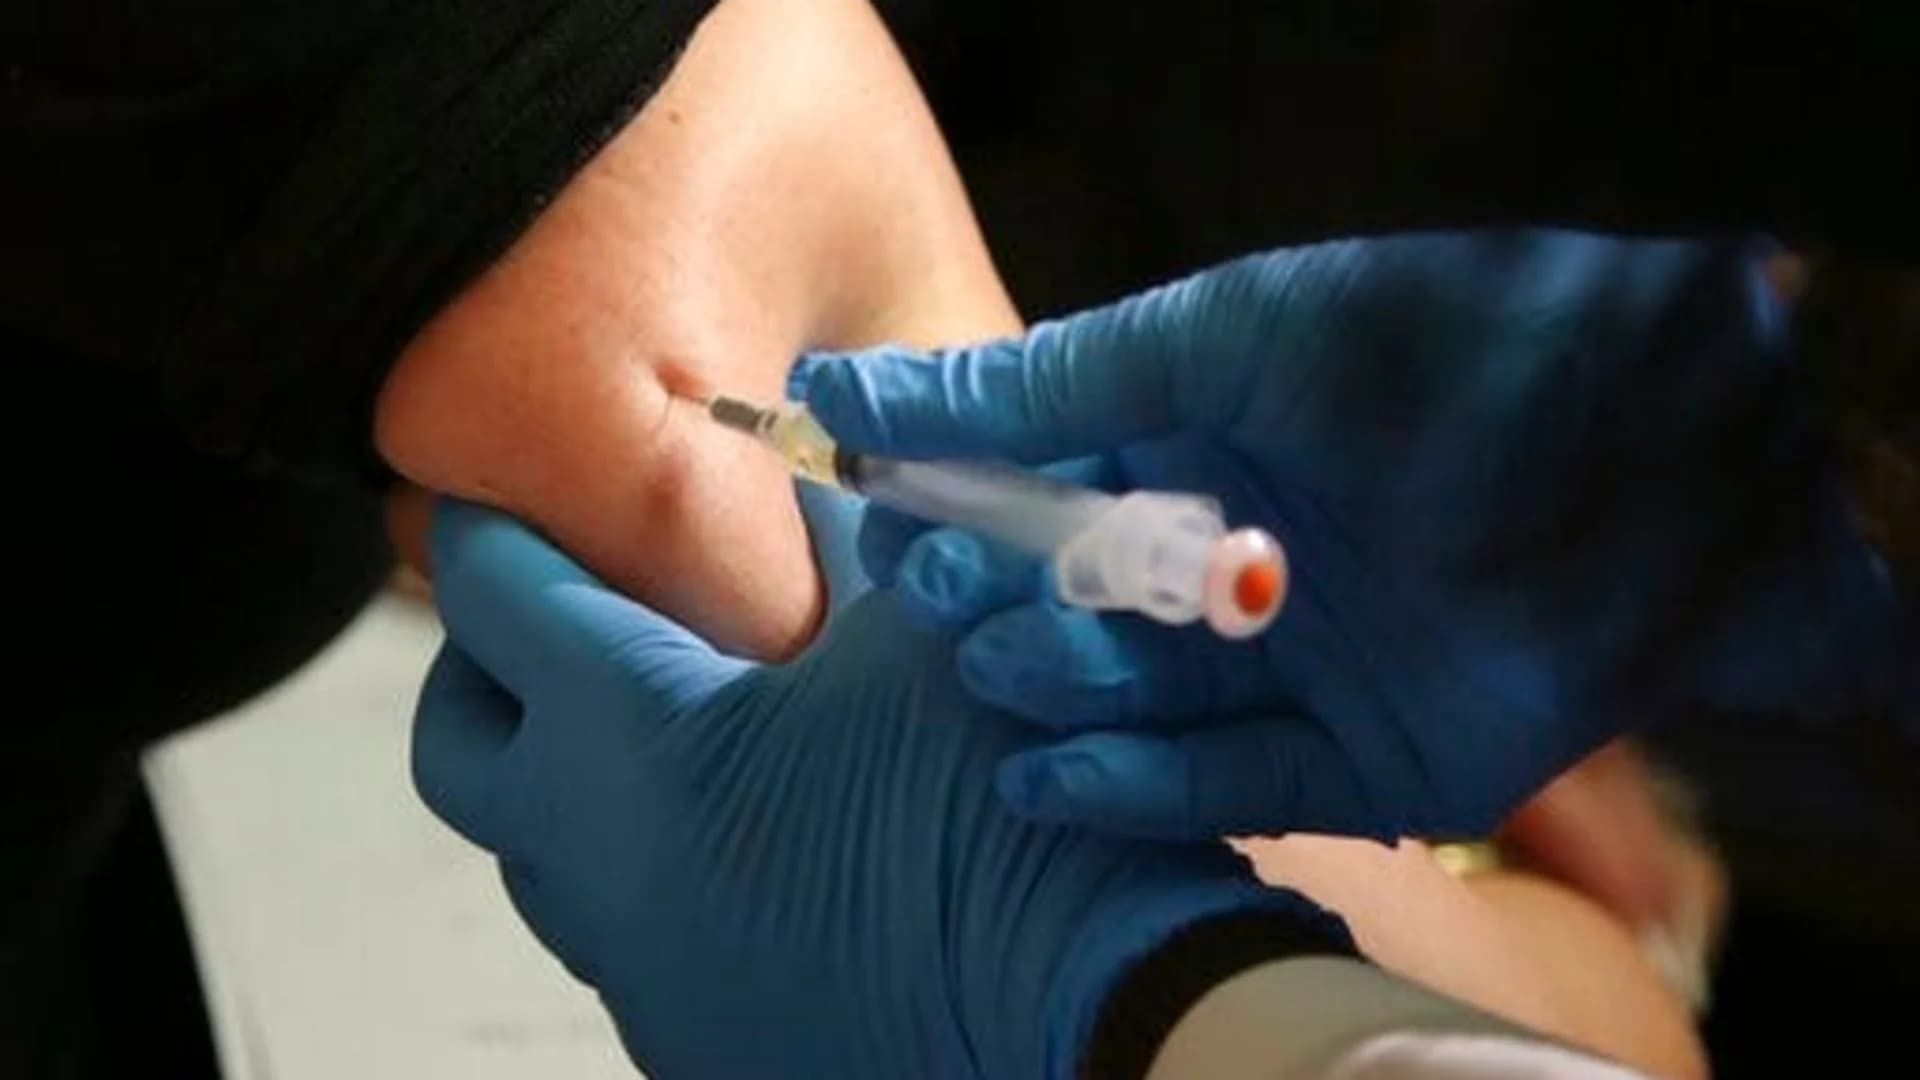 NYC orders mandatory vaccines for some amid measles outbreak